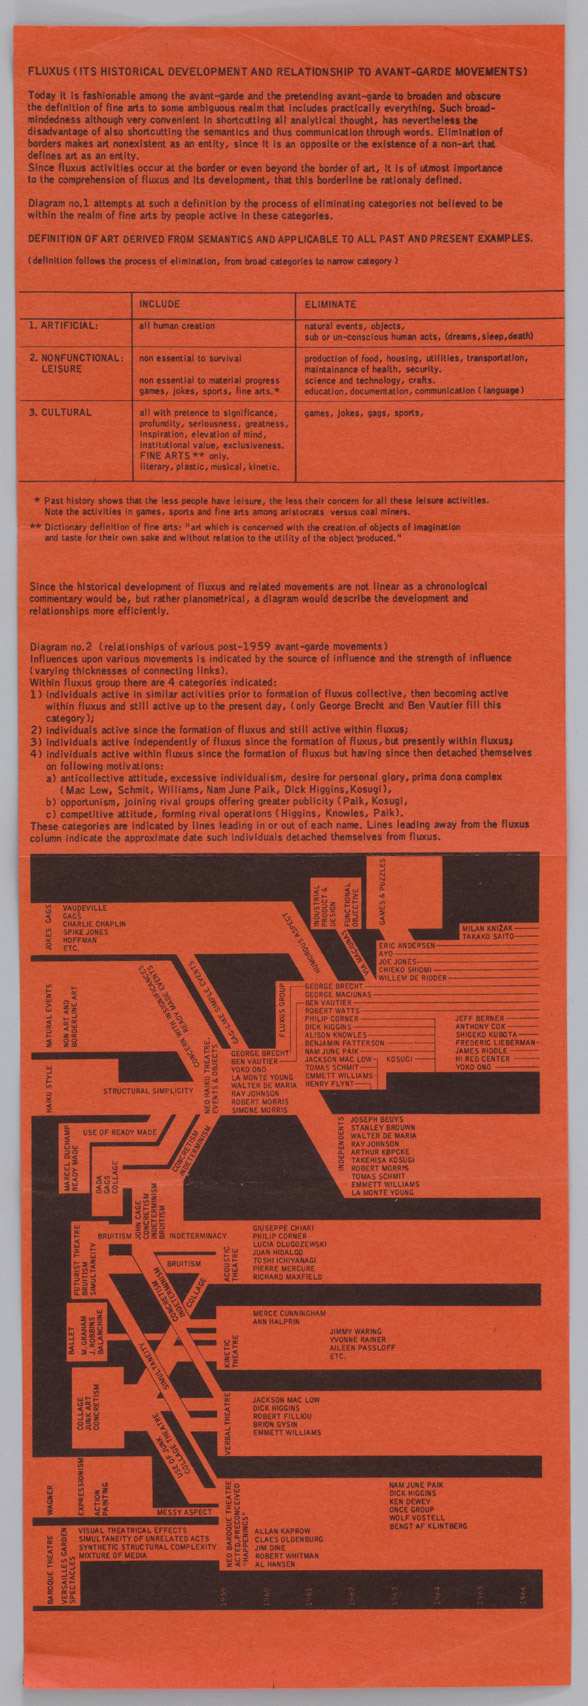 Fluxus (its historical development and relationship to avant-garde movements)